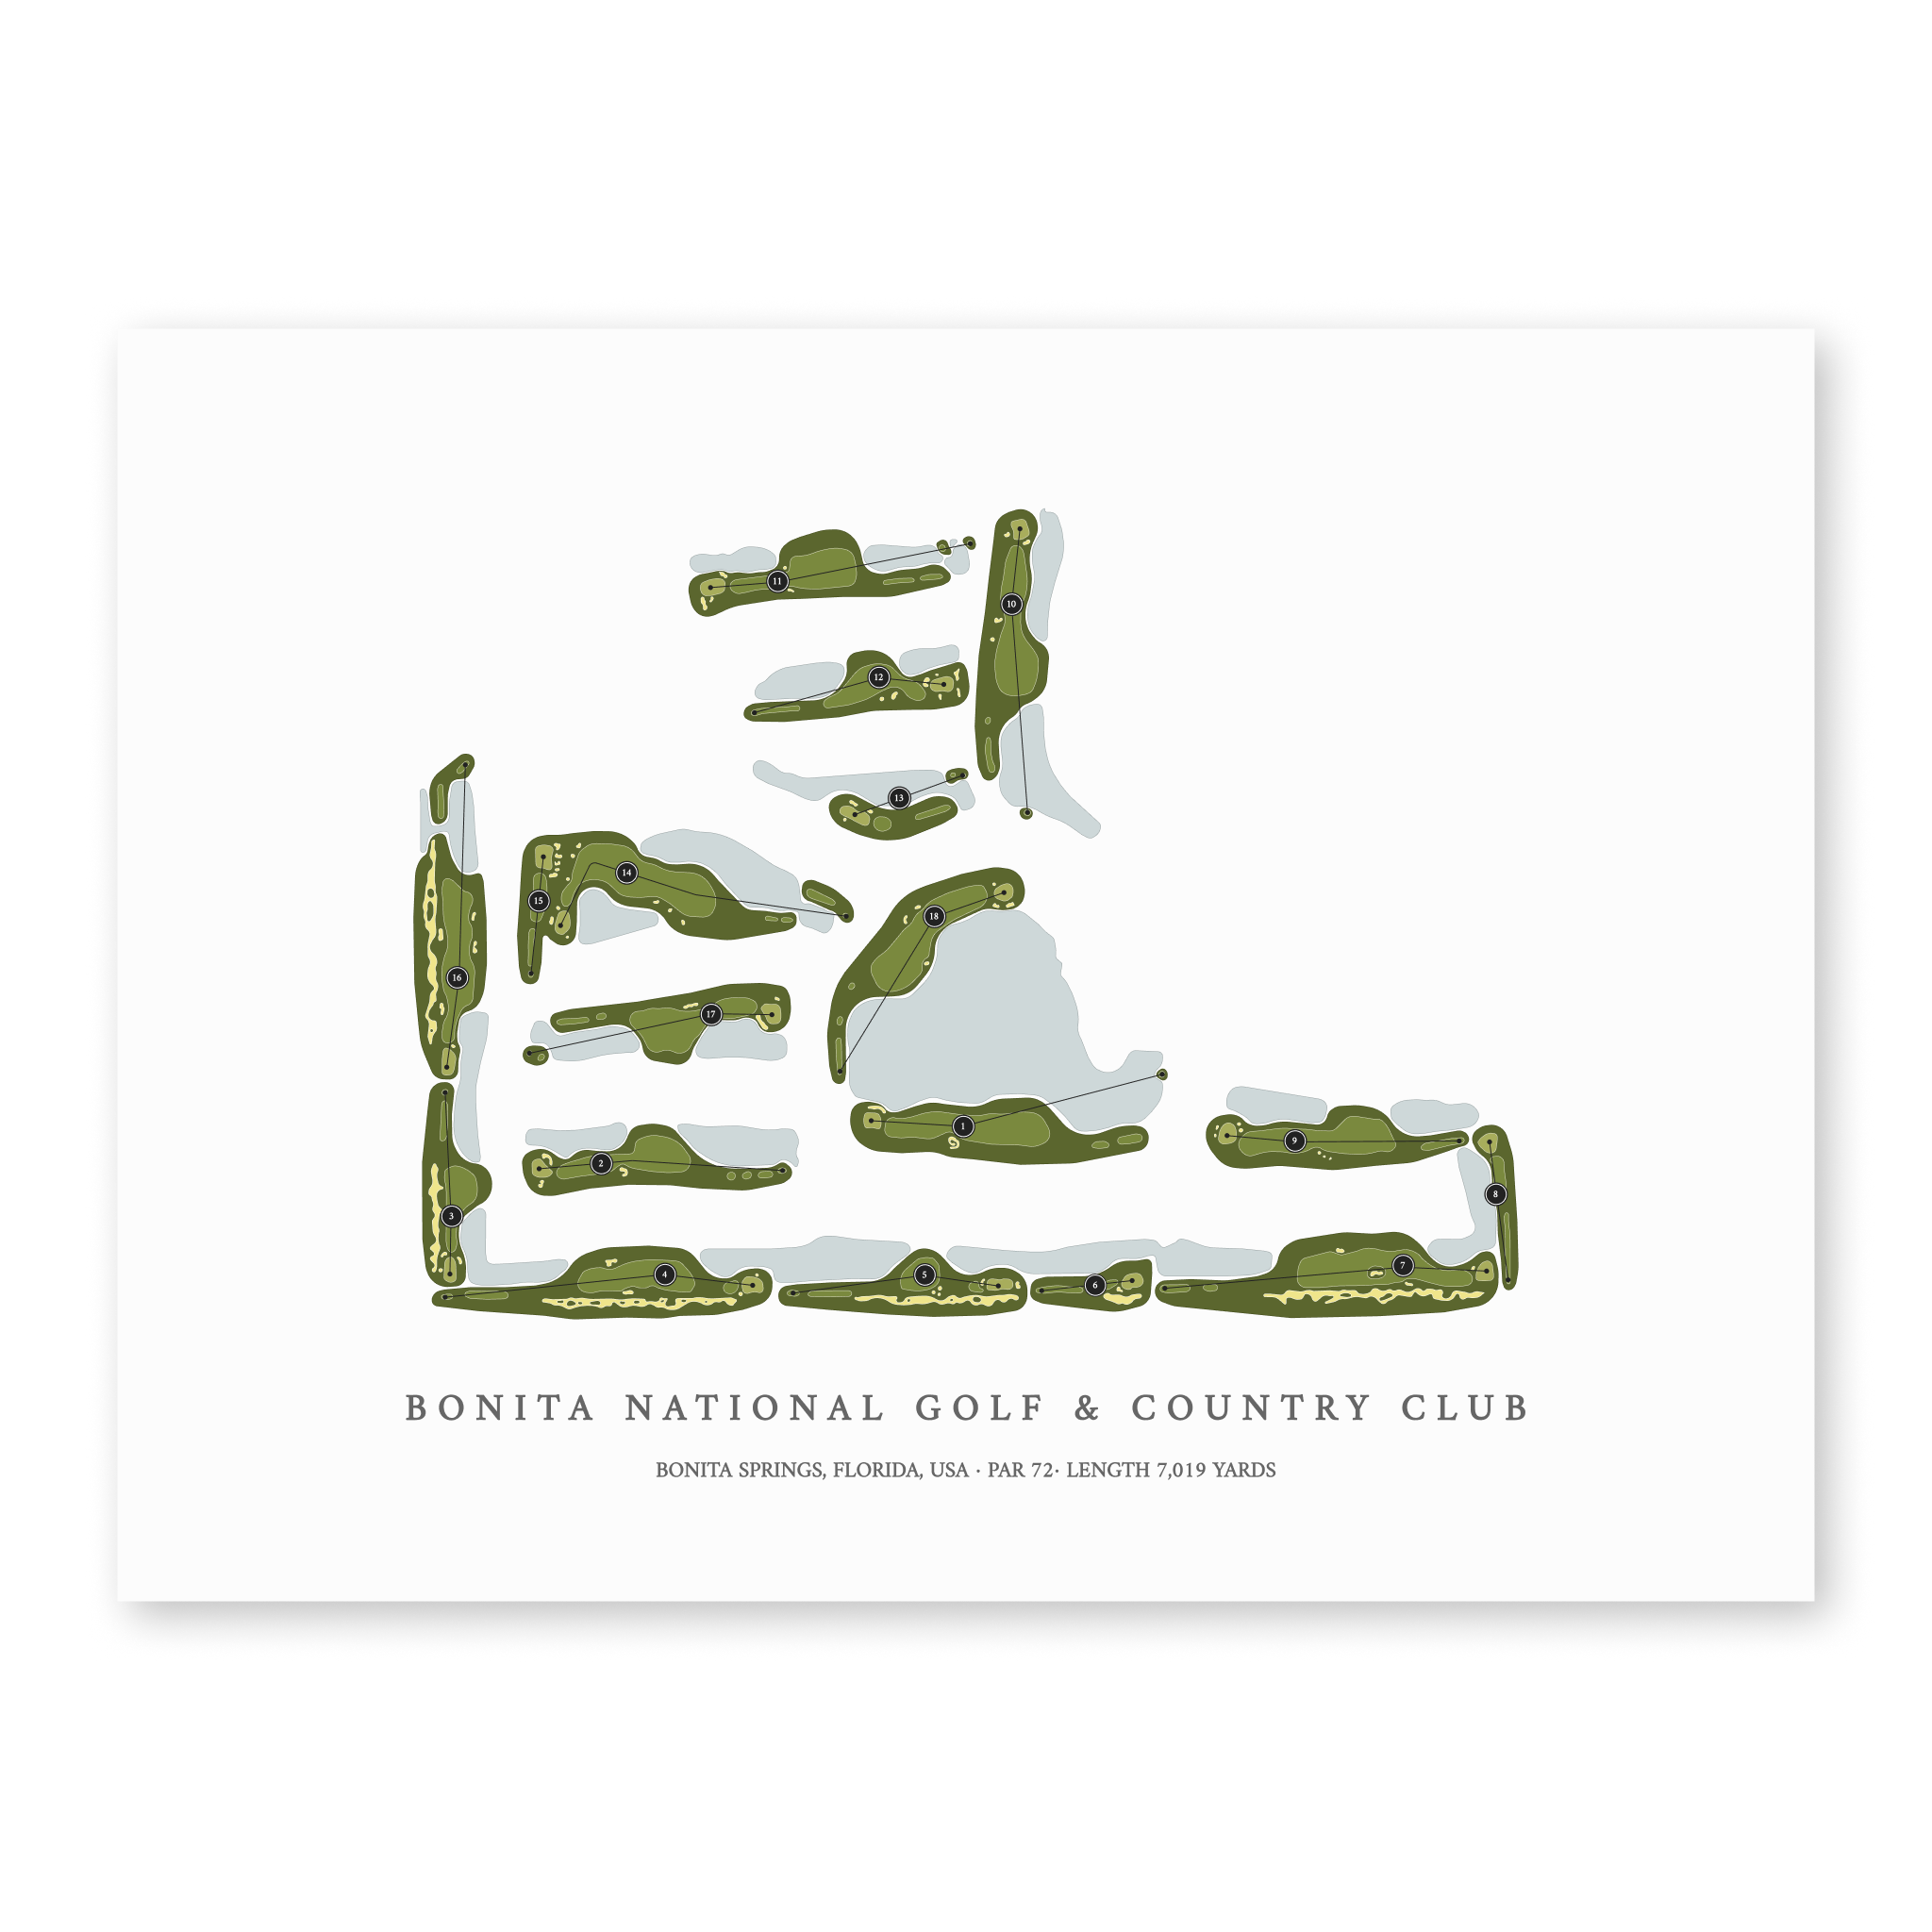 Bonita National Golf & Country Club| Golf Course Print | Unframed With Hole Numbers #hole numbers_yes